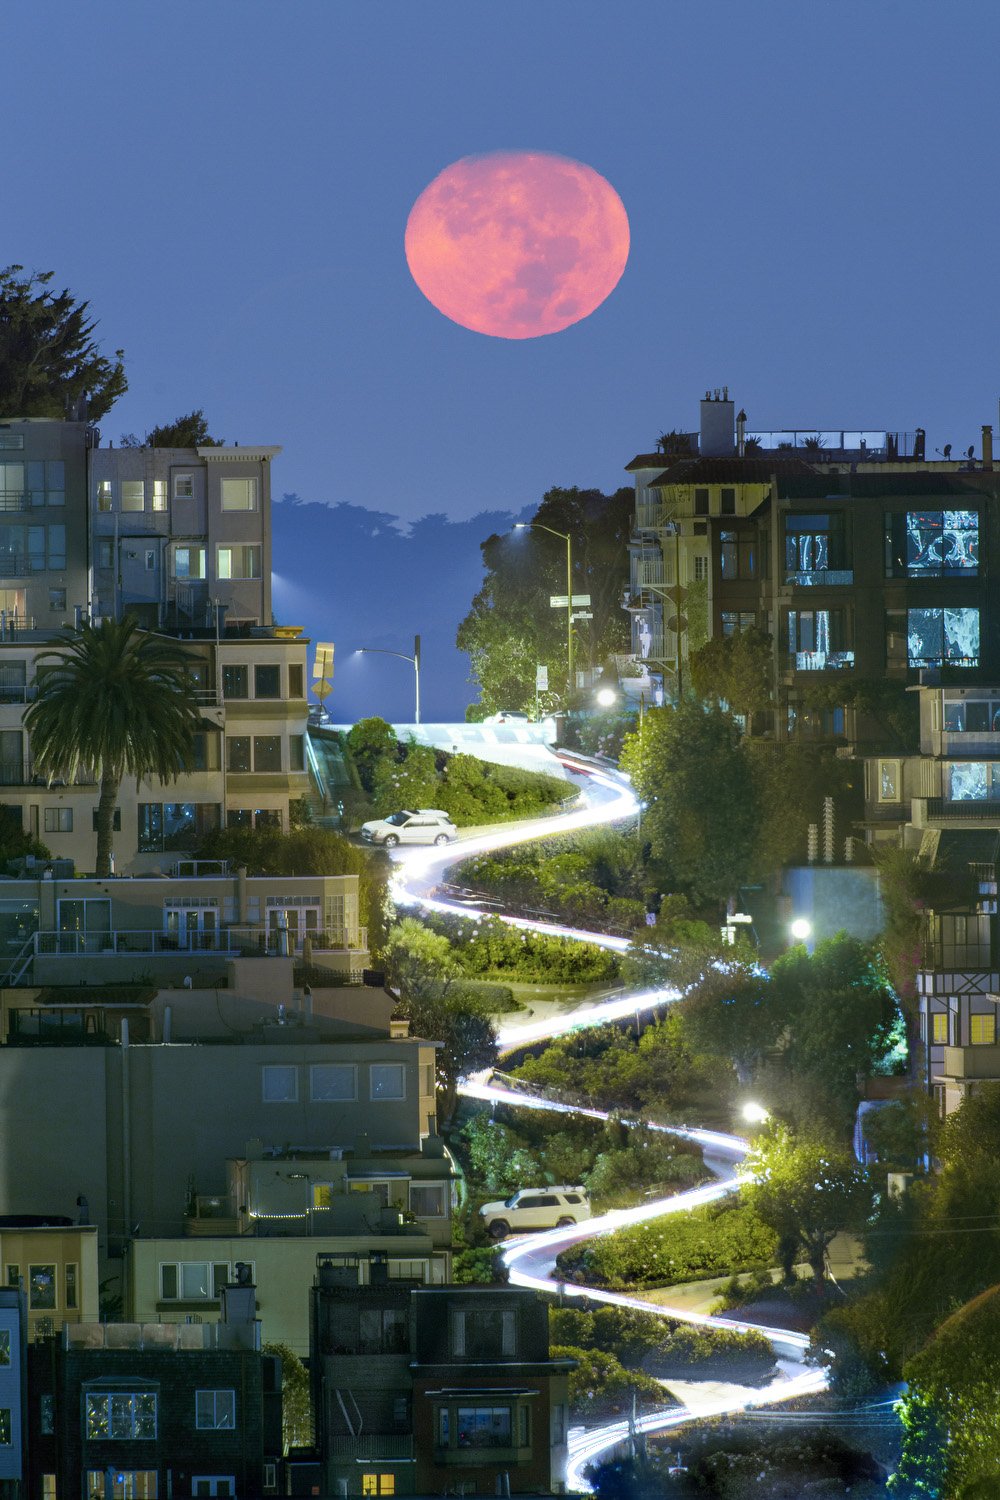  Car headlights illuminate Lombard Street in San Francisco, Calif. 4:41 am, Thursday, Oct. 29, 2020. The famous winding section of road claims to be “the crookedest street in the world.” 